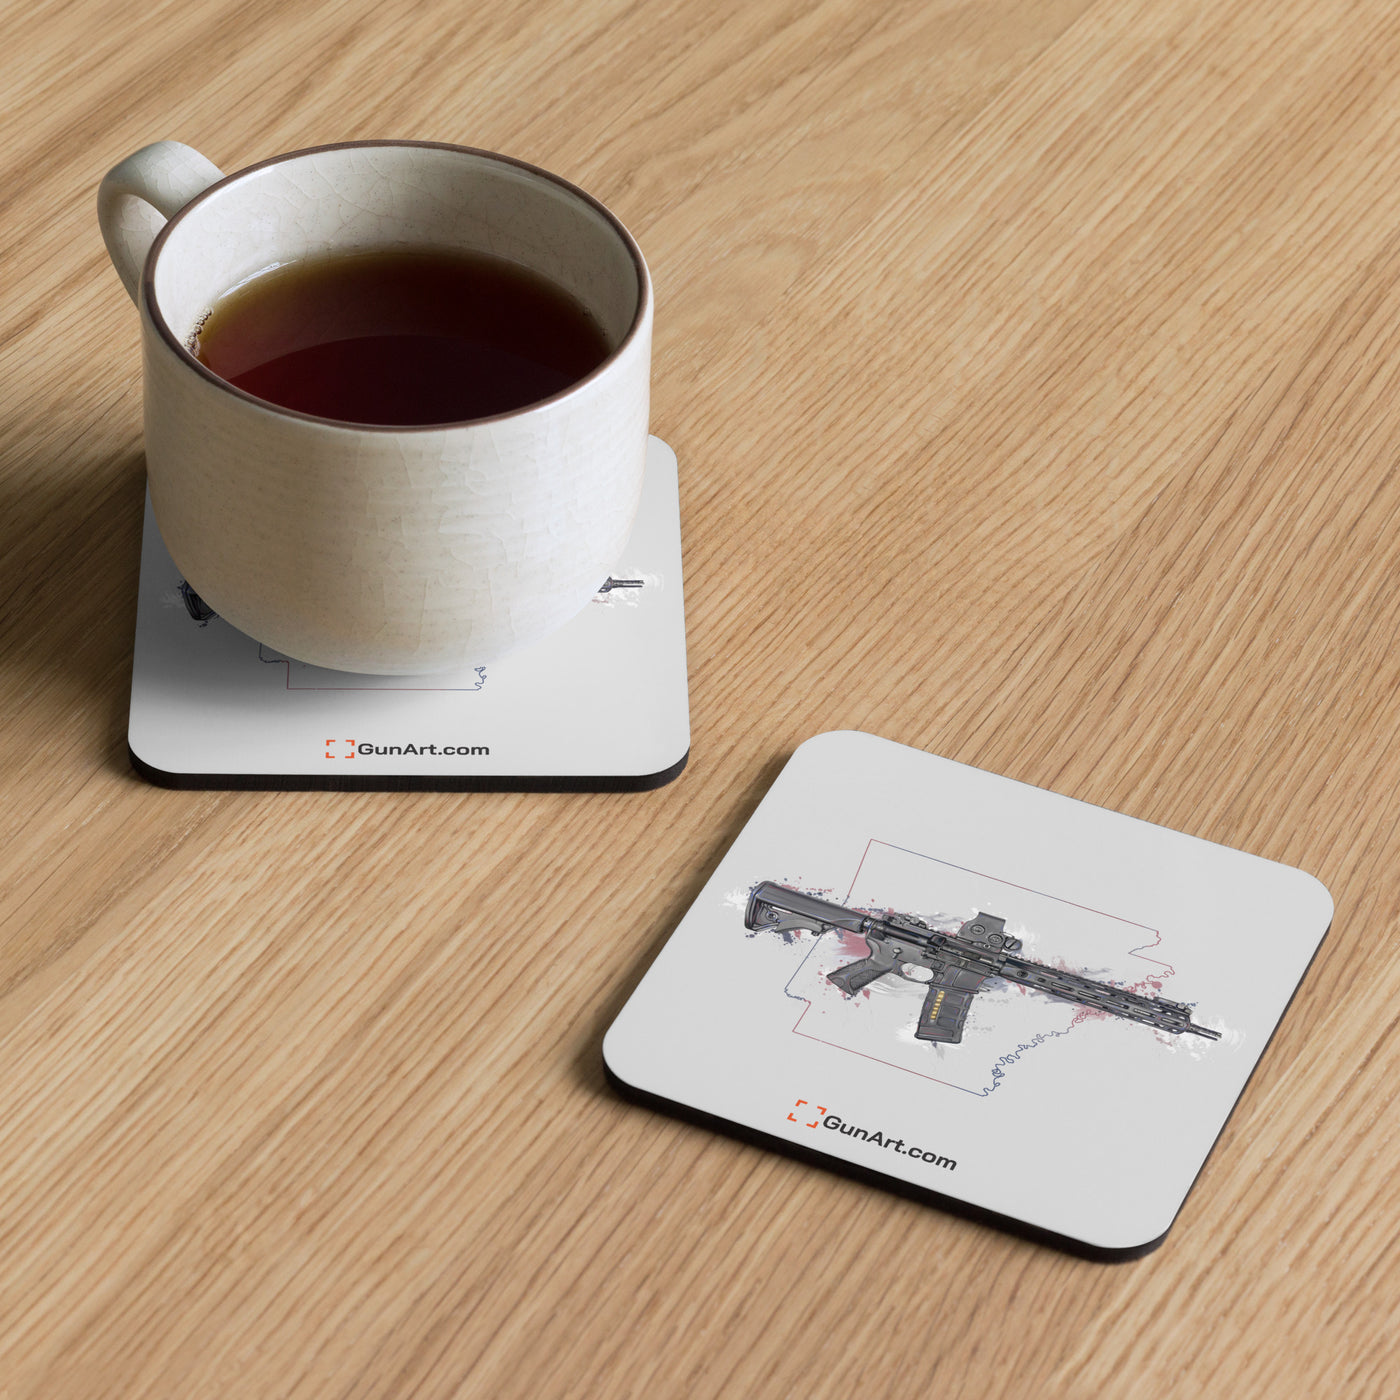 Defending Freedom - Akansas - AR-15 State Cork-back Coaster - Colored State